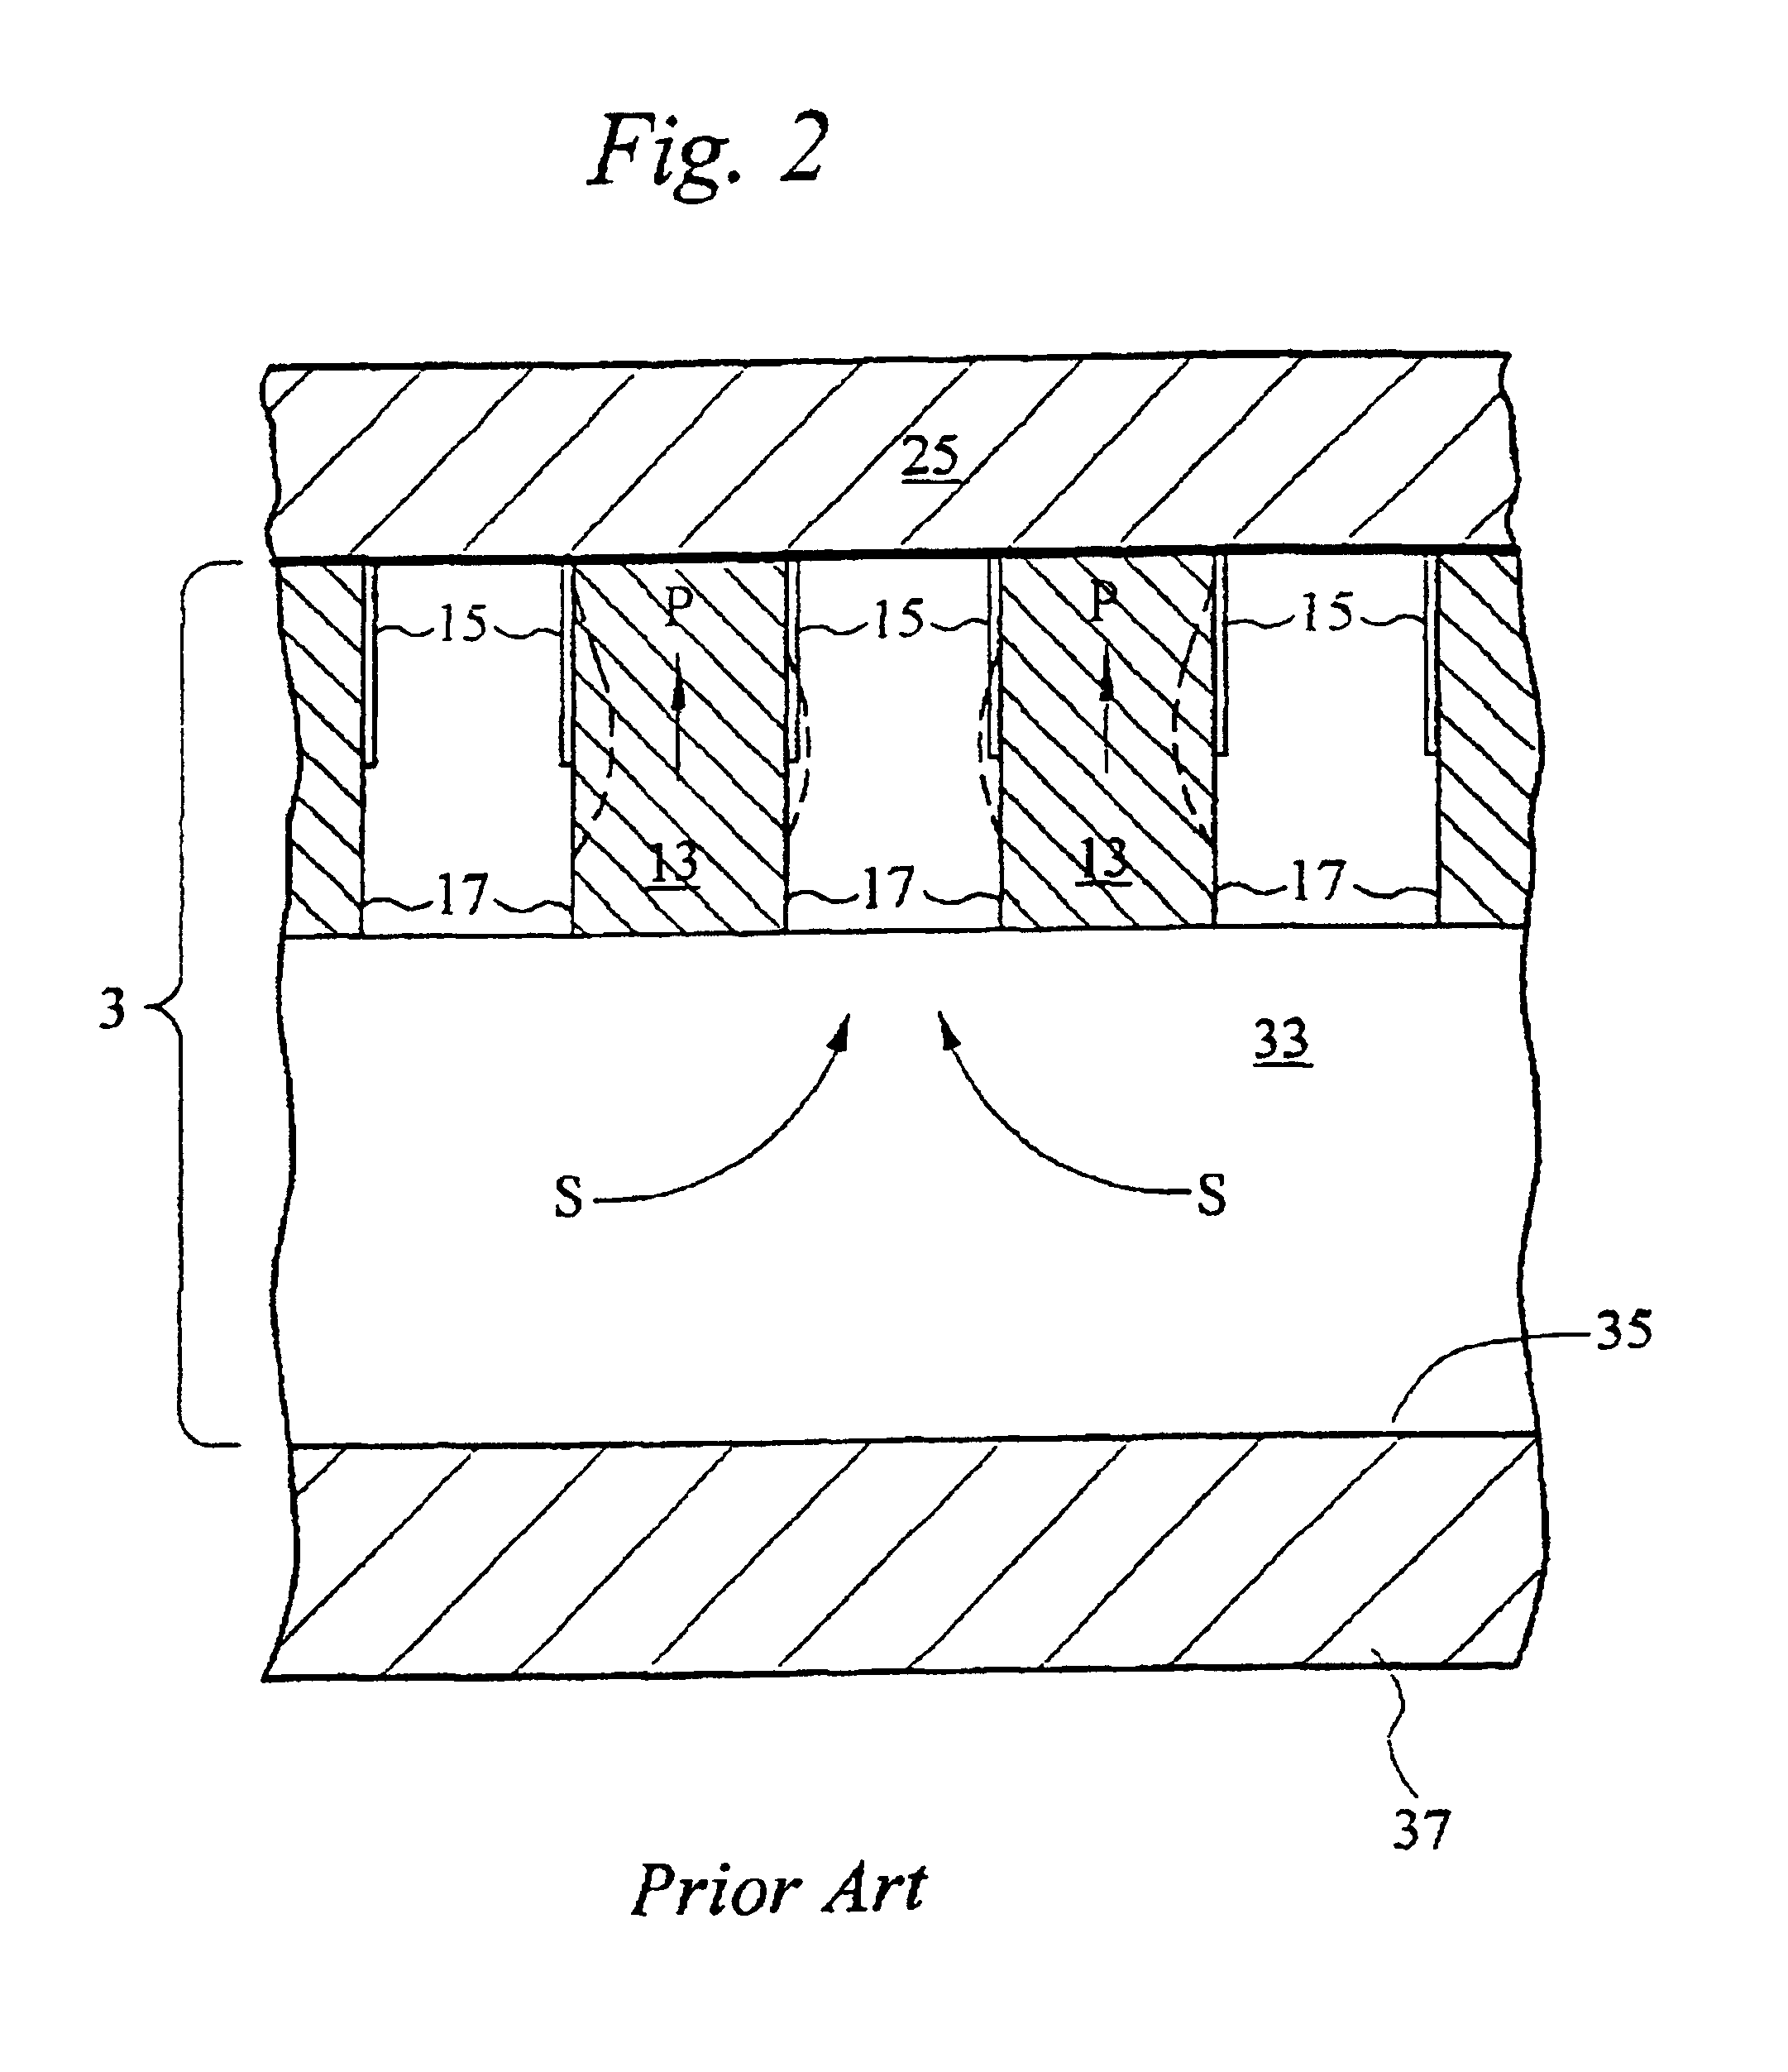 Method of manufacturing a droplet deposition apparatus